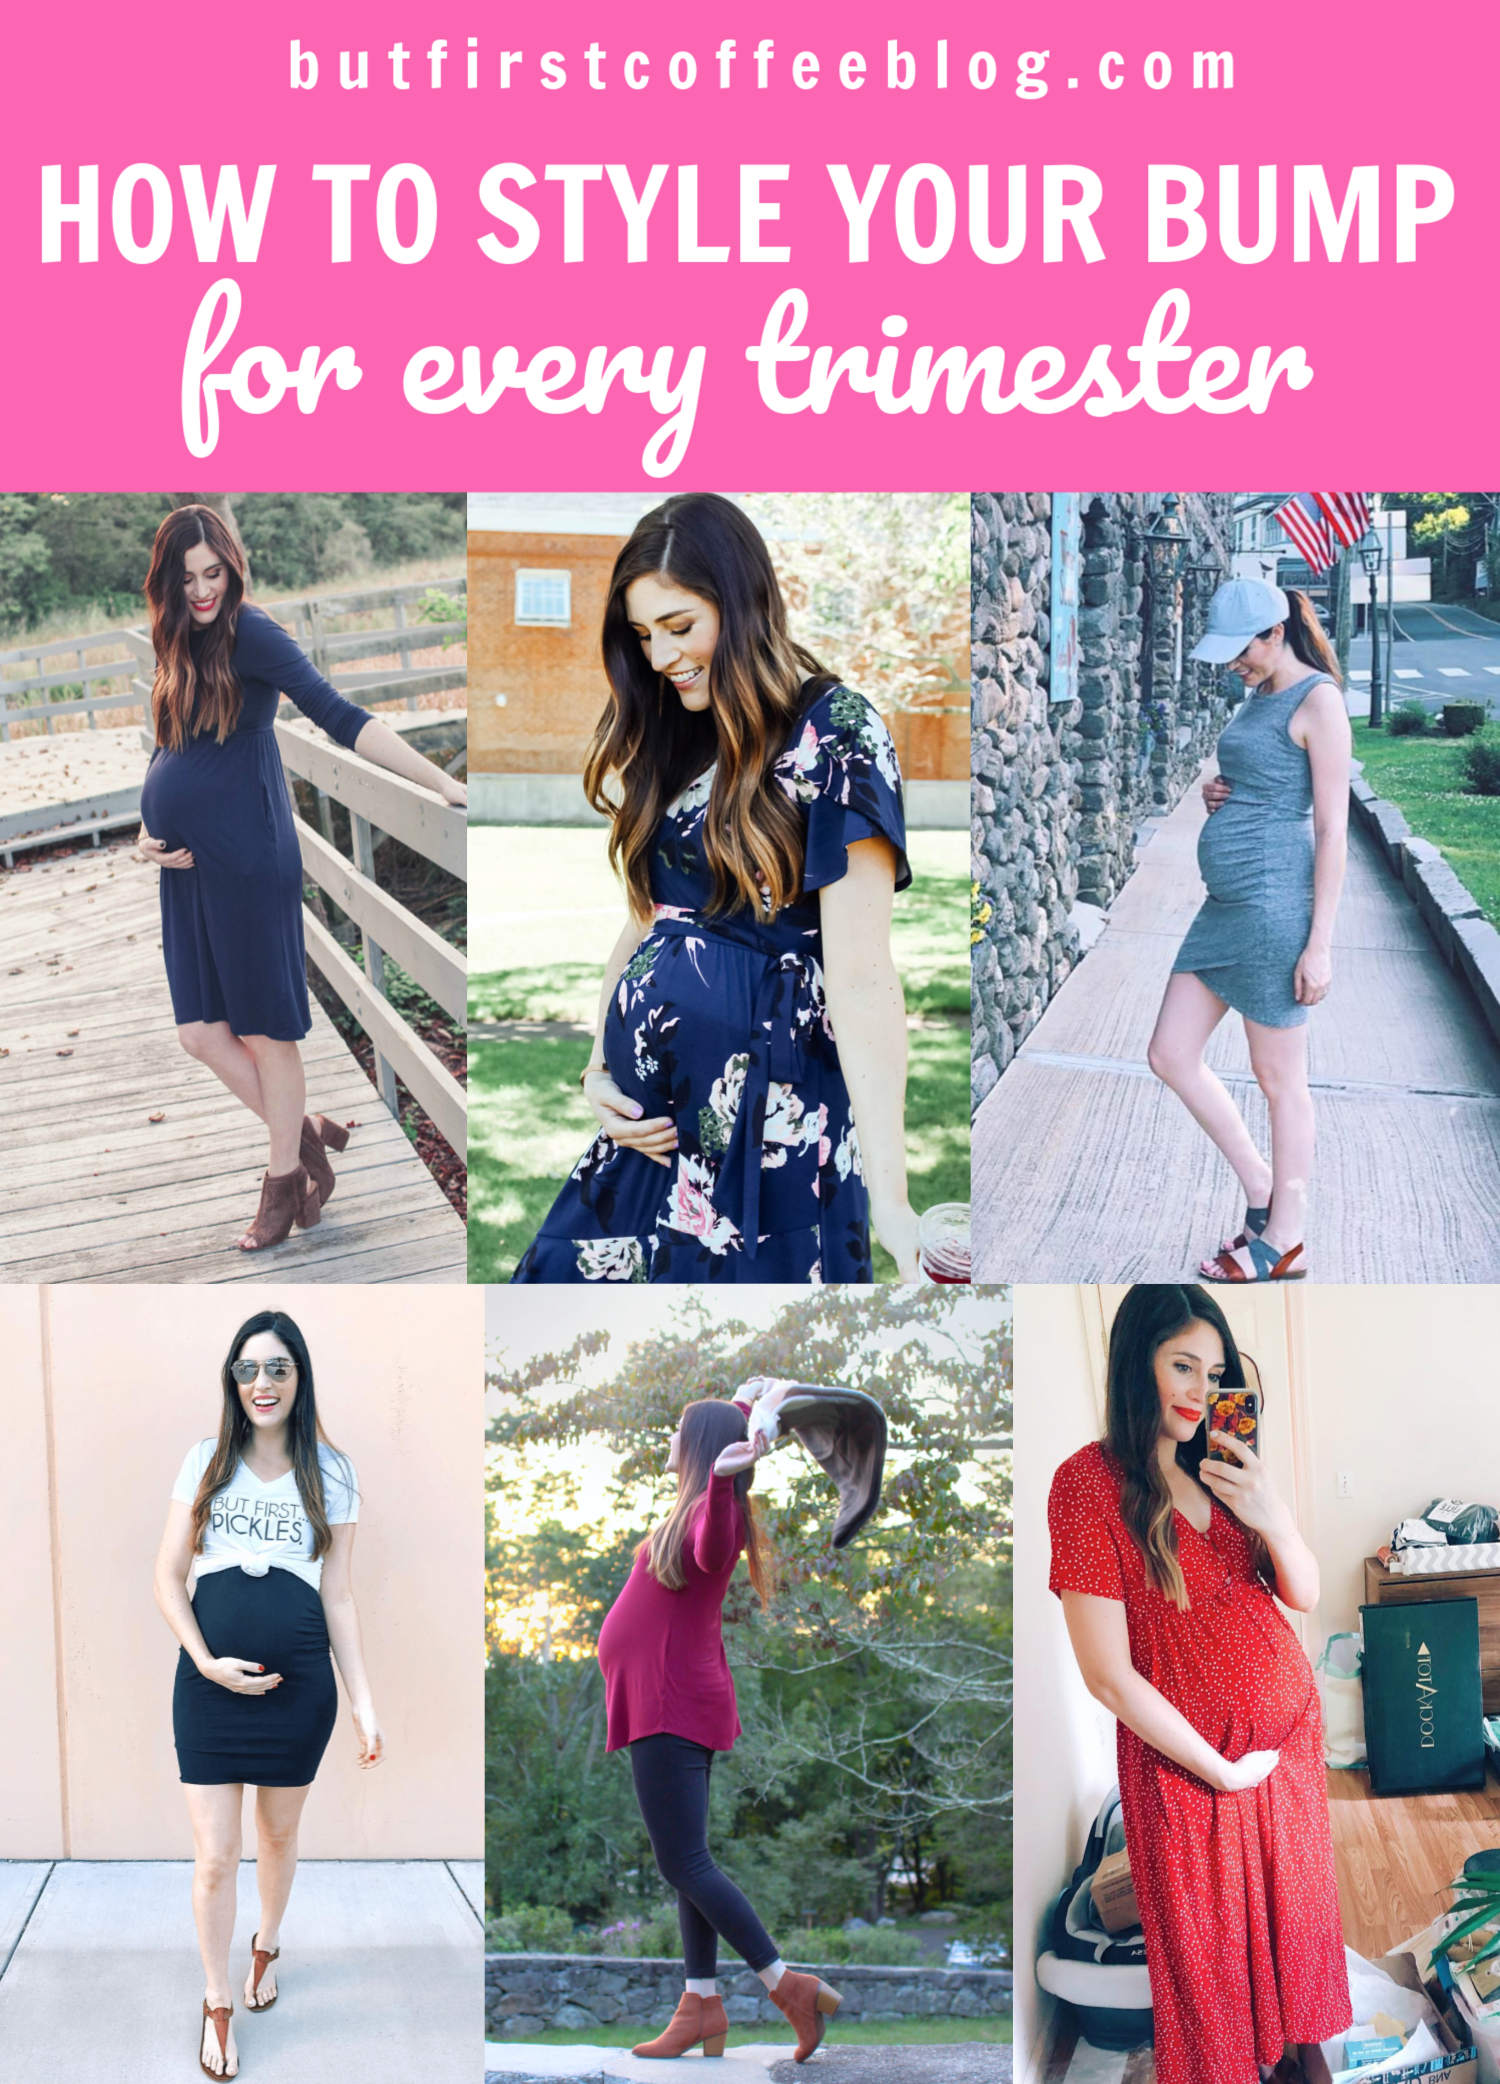 Pregnancy Style and How to Dress the Baby Bump